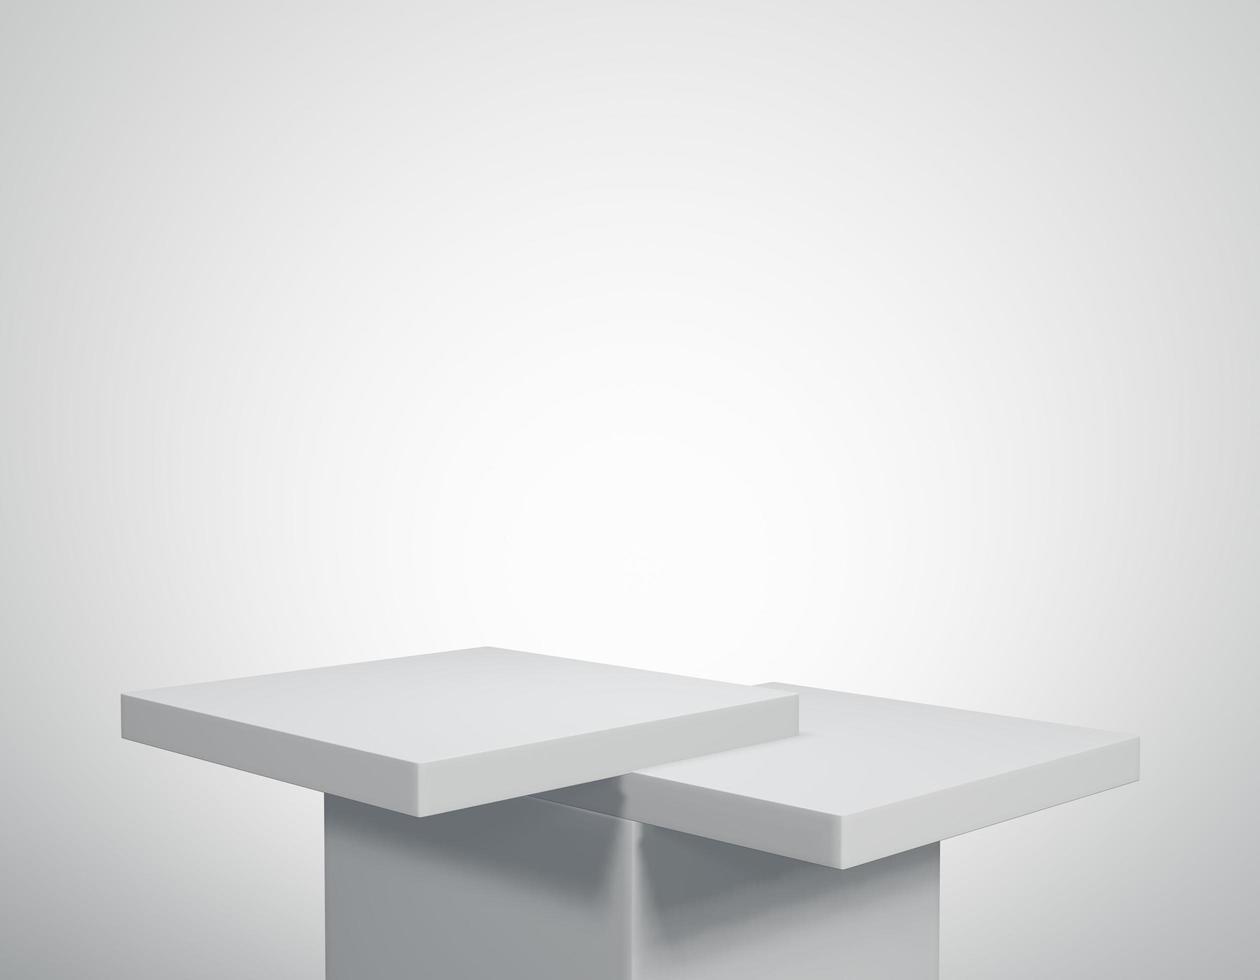 empty white podium.3D display podium on white background.Stand Minimal mockup for presentation.Abstract white background concept.Geometric platform show cosmetic product.Stage showcase.3D rendering photo